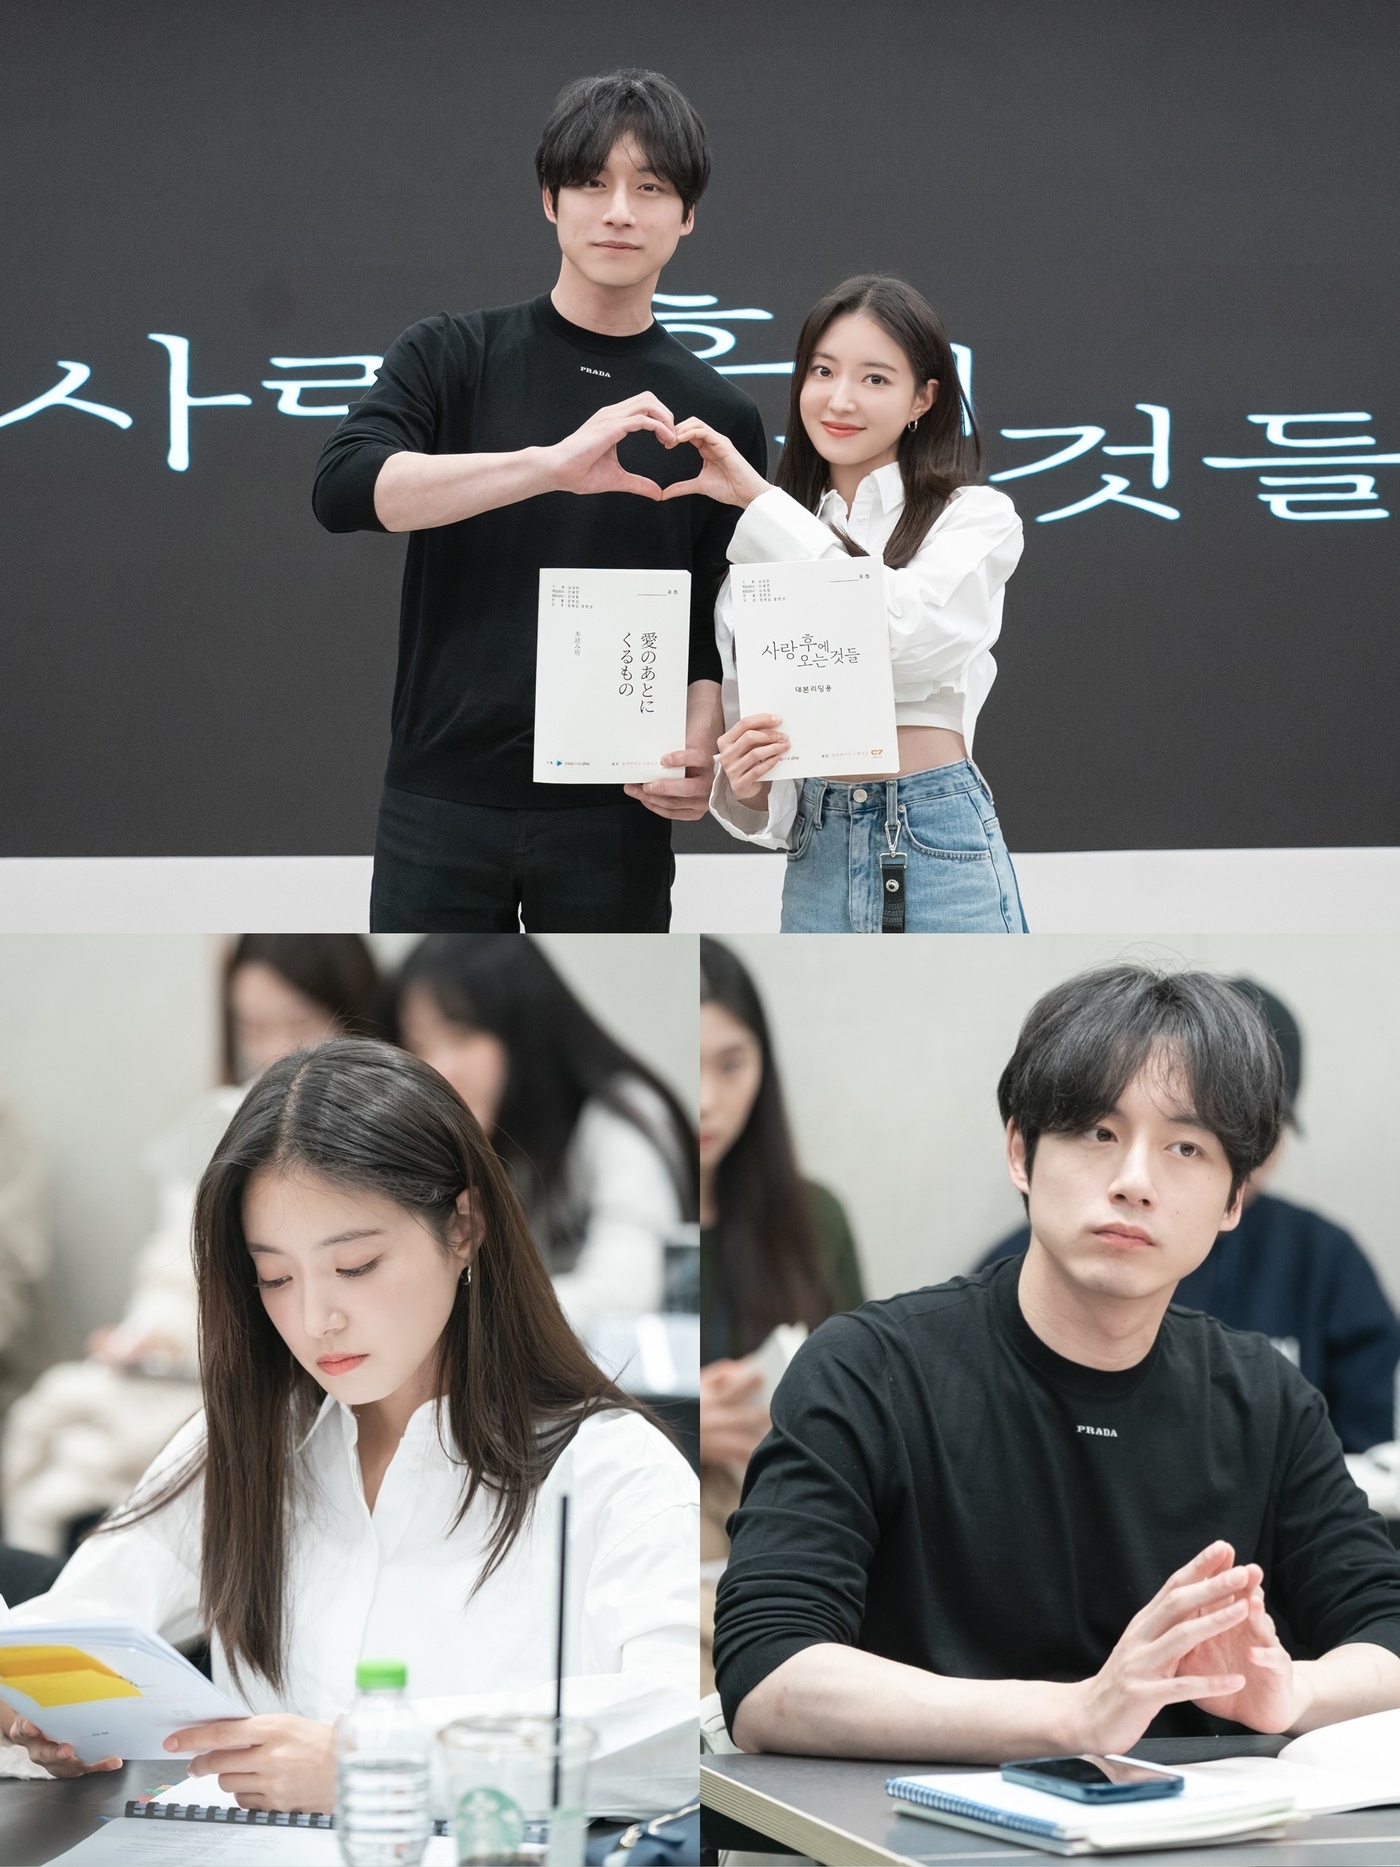 Watch: Lee Se Young And Sakaguchi Kentaro Test Their Chemistry At Script Reading For New Drama “What Comes After Love”